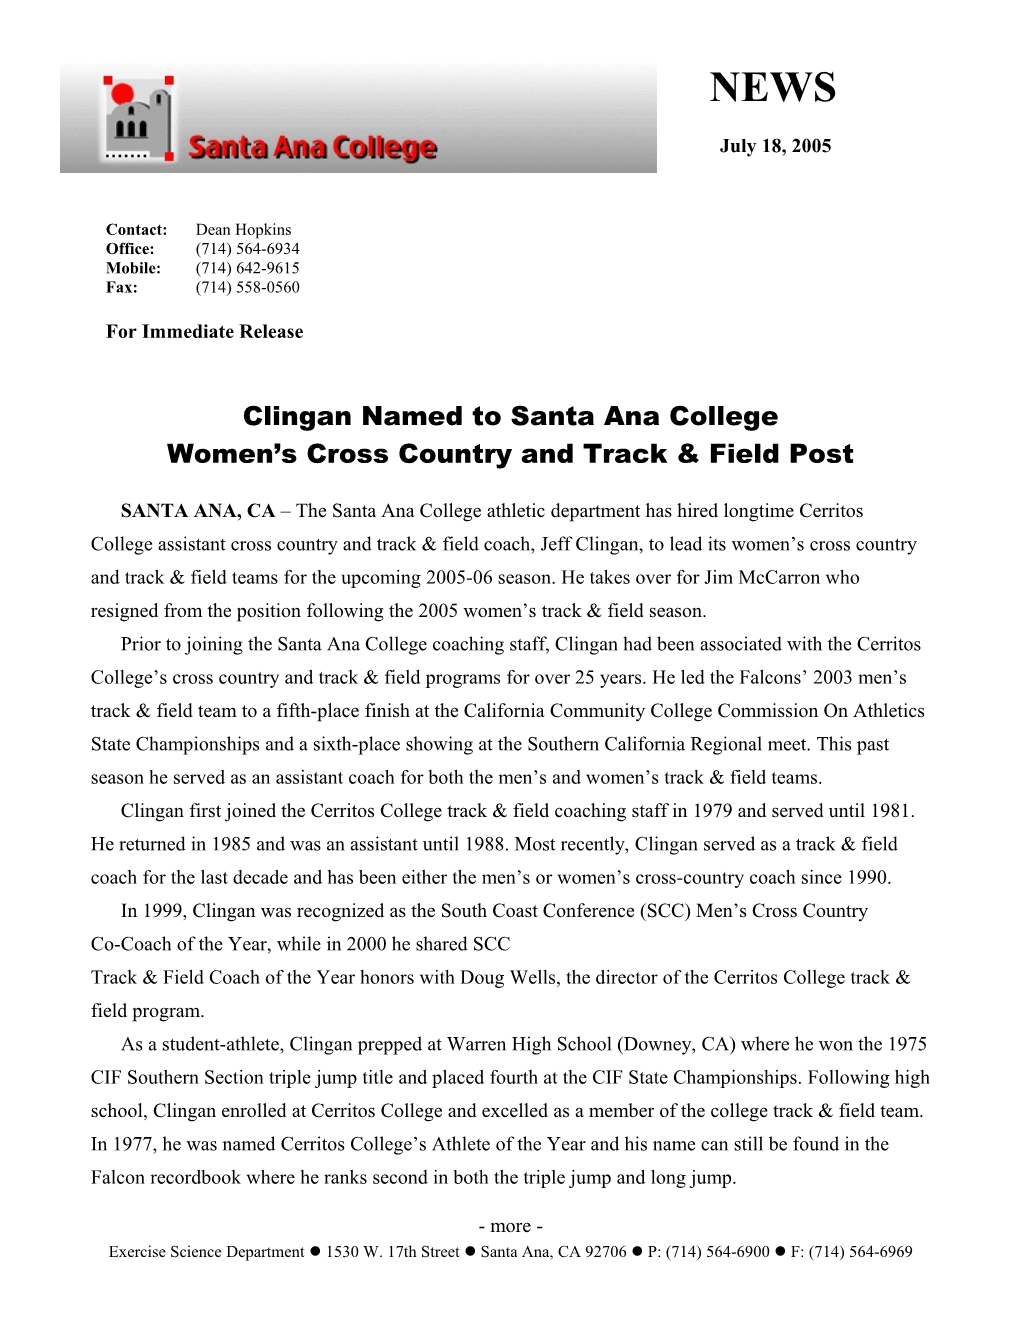 Clingan Named to Santa Ana College Women S Cross Country and Track & Field Post